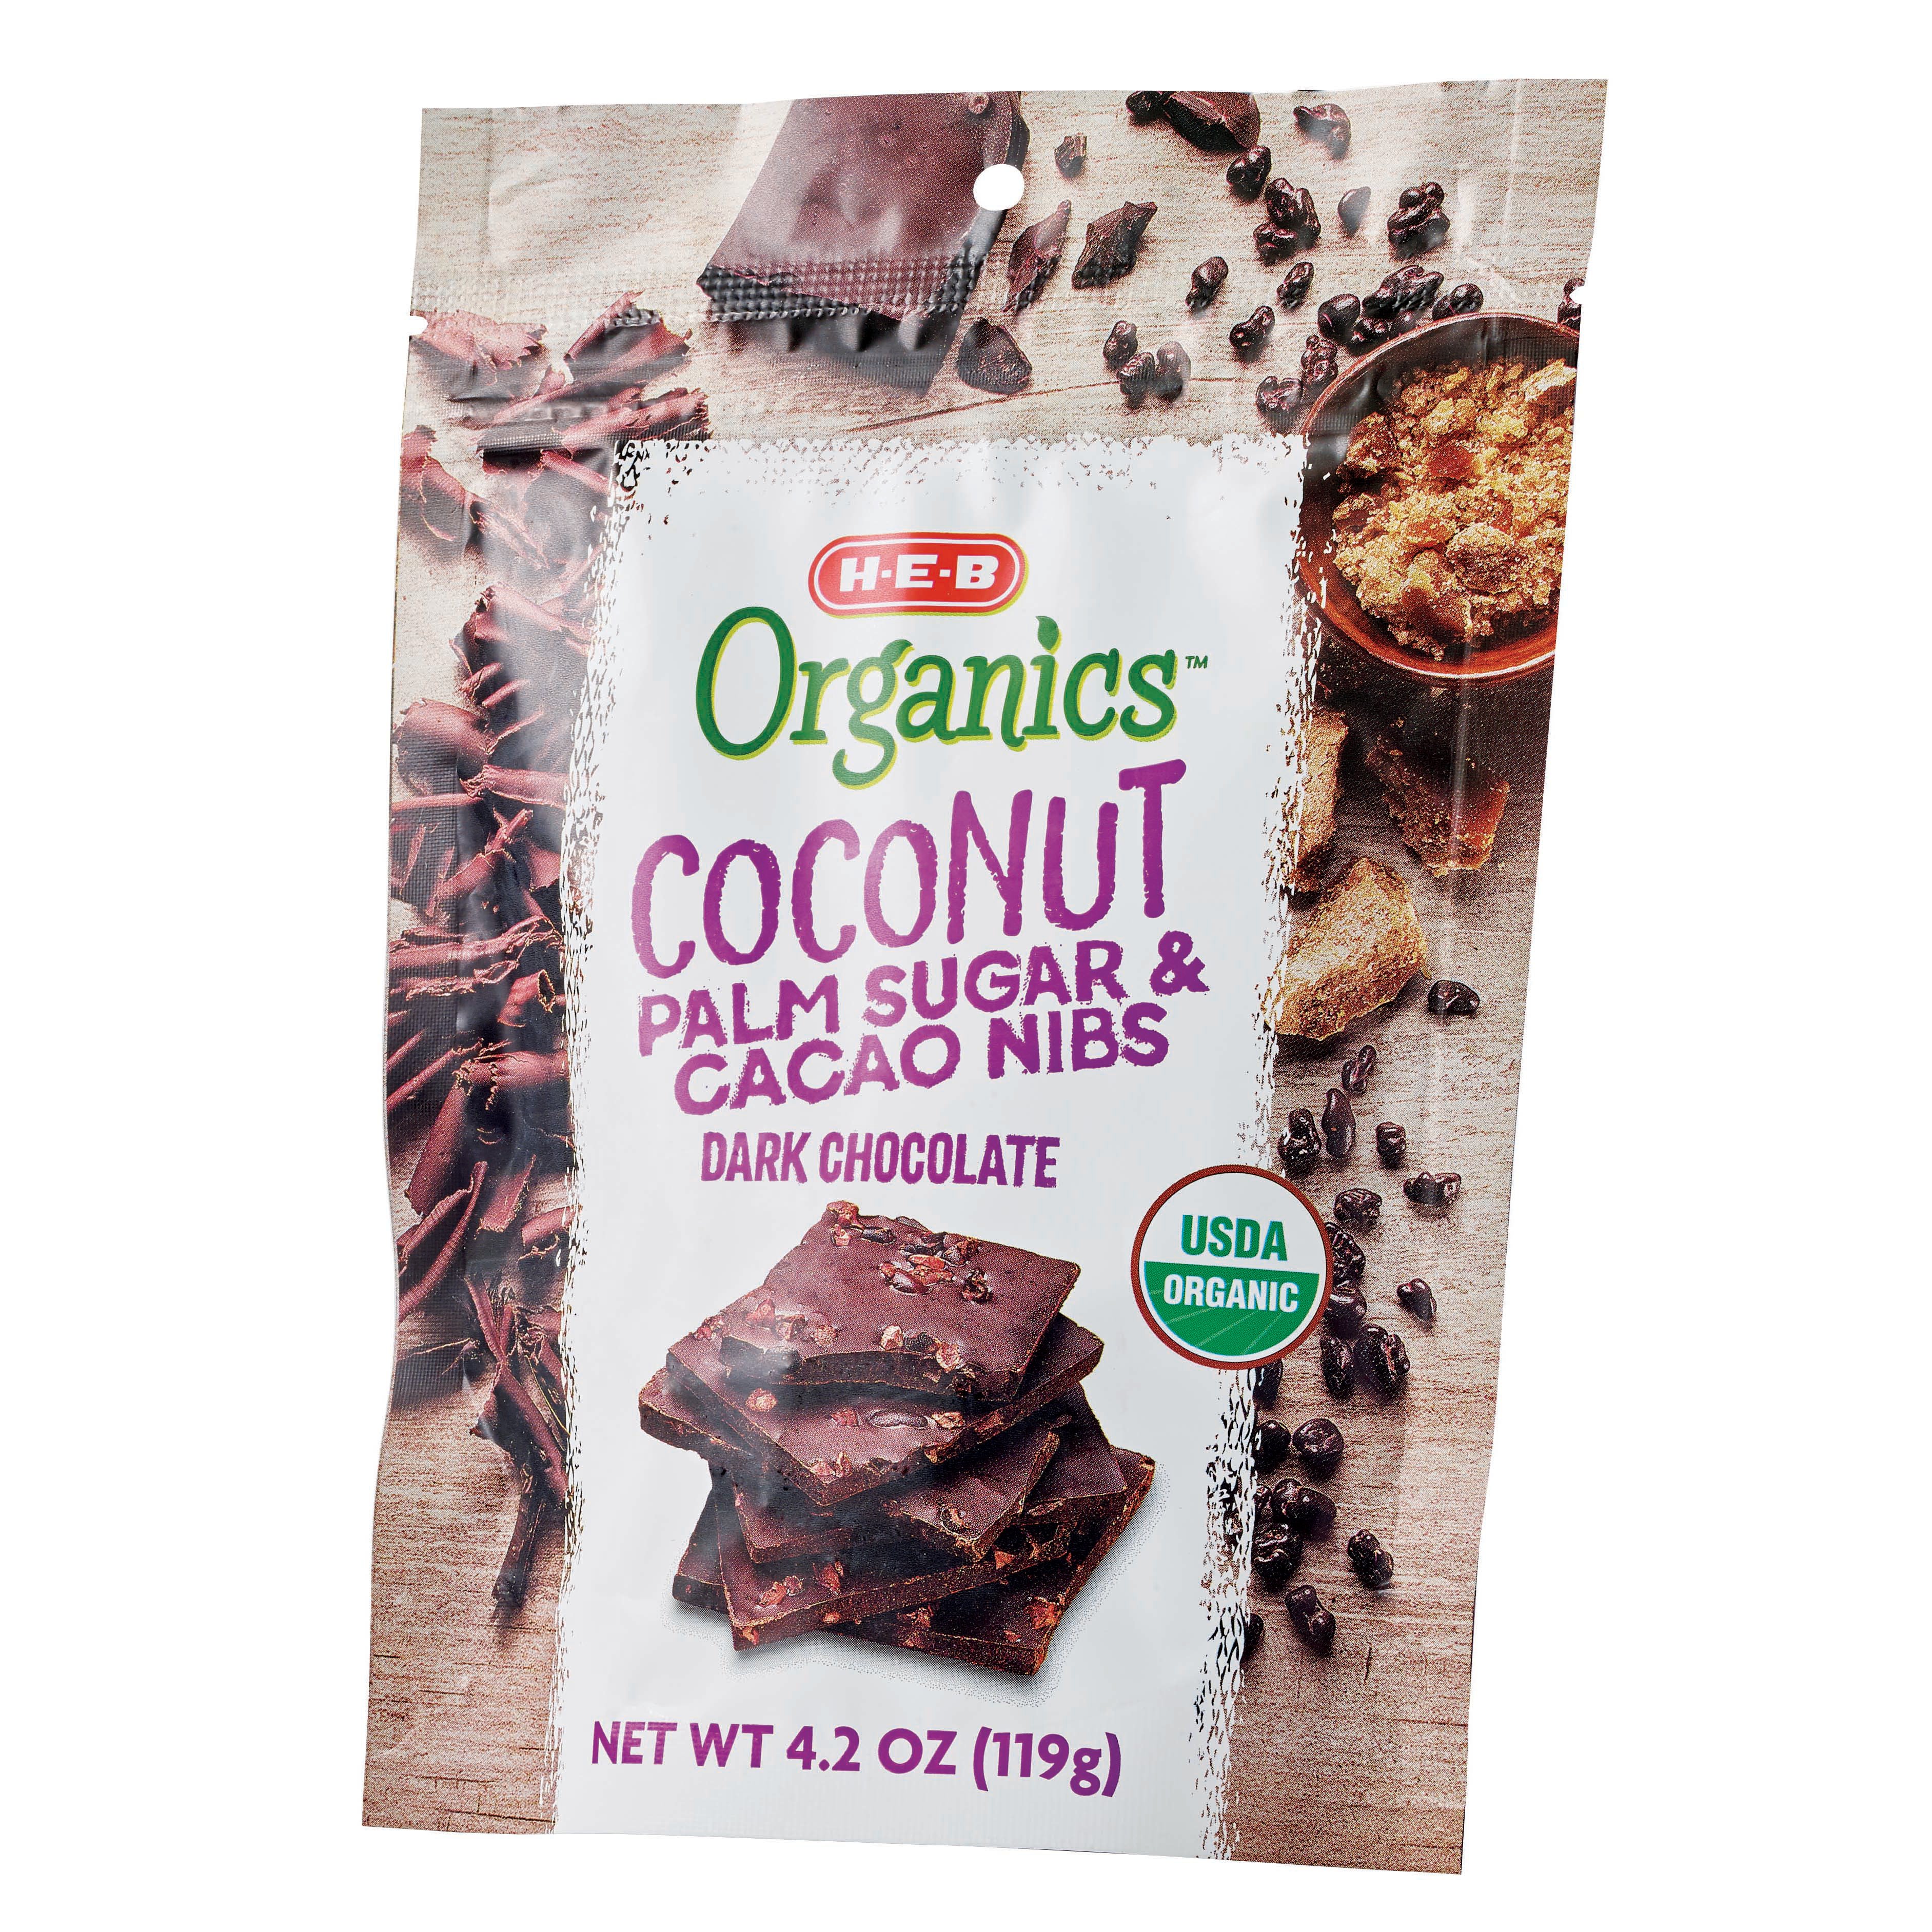 H E B Organics Dark Chocolate Coconut Palm Sugar Cacao Nibs Shop Candy At H E B,What Is A Dogs Normal Temperature